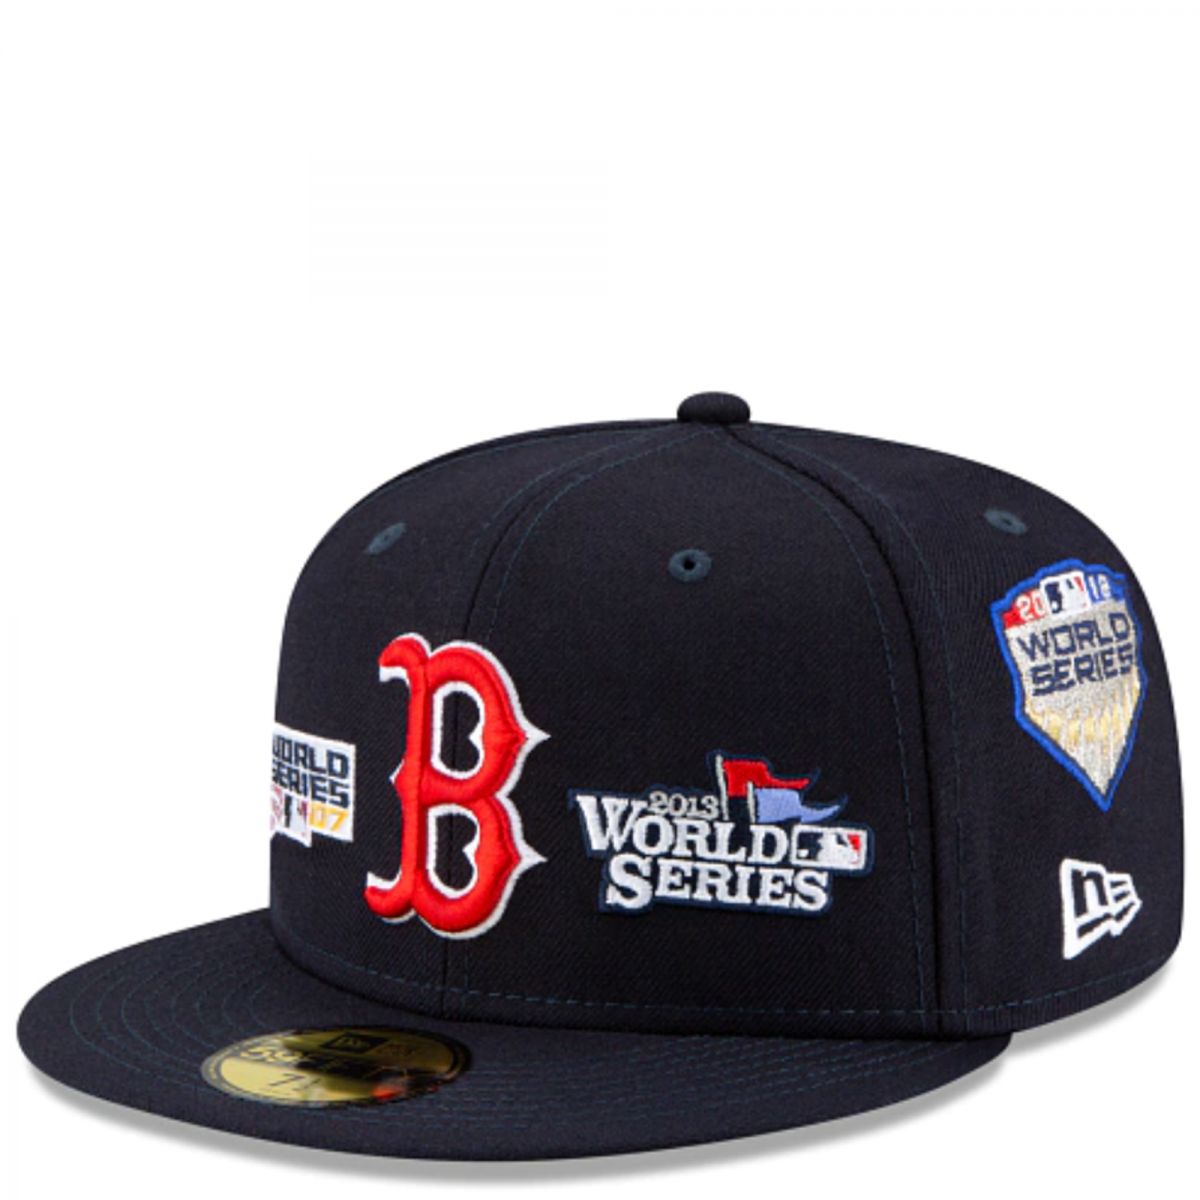 NEW ERA CAPS Boston Red Sox 9x World Series Champions 59Fifty Fitted